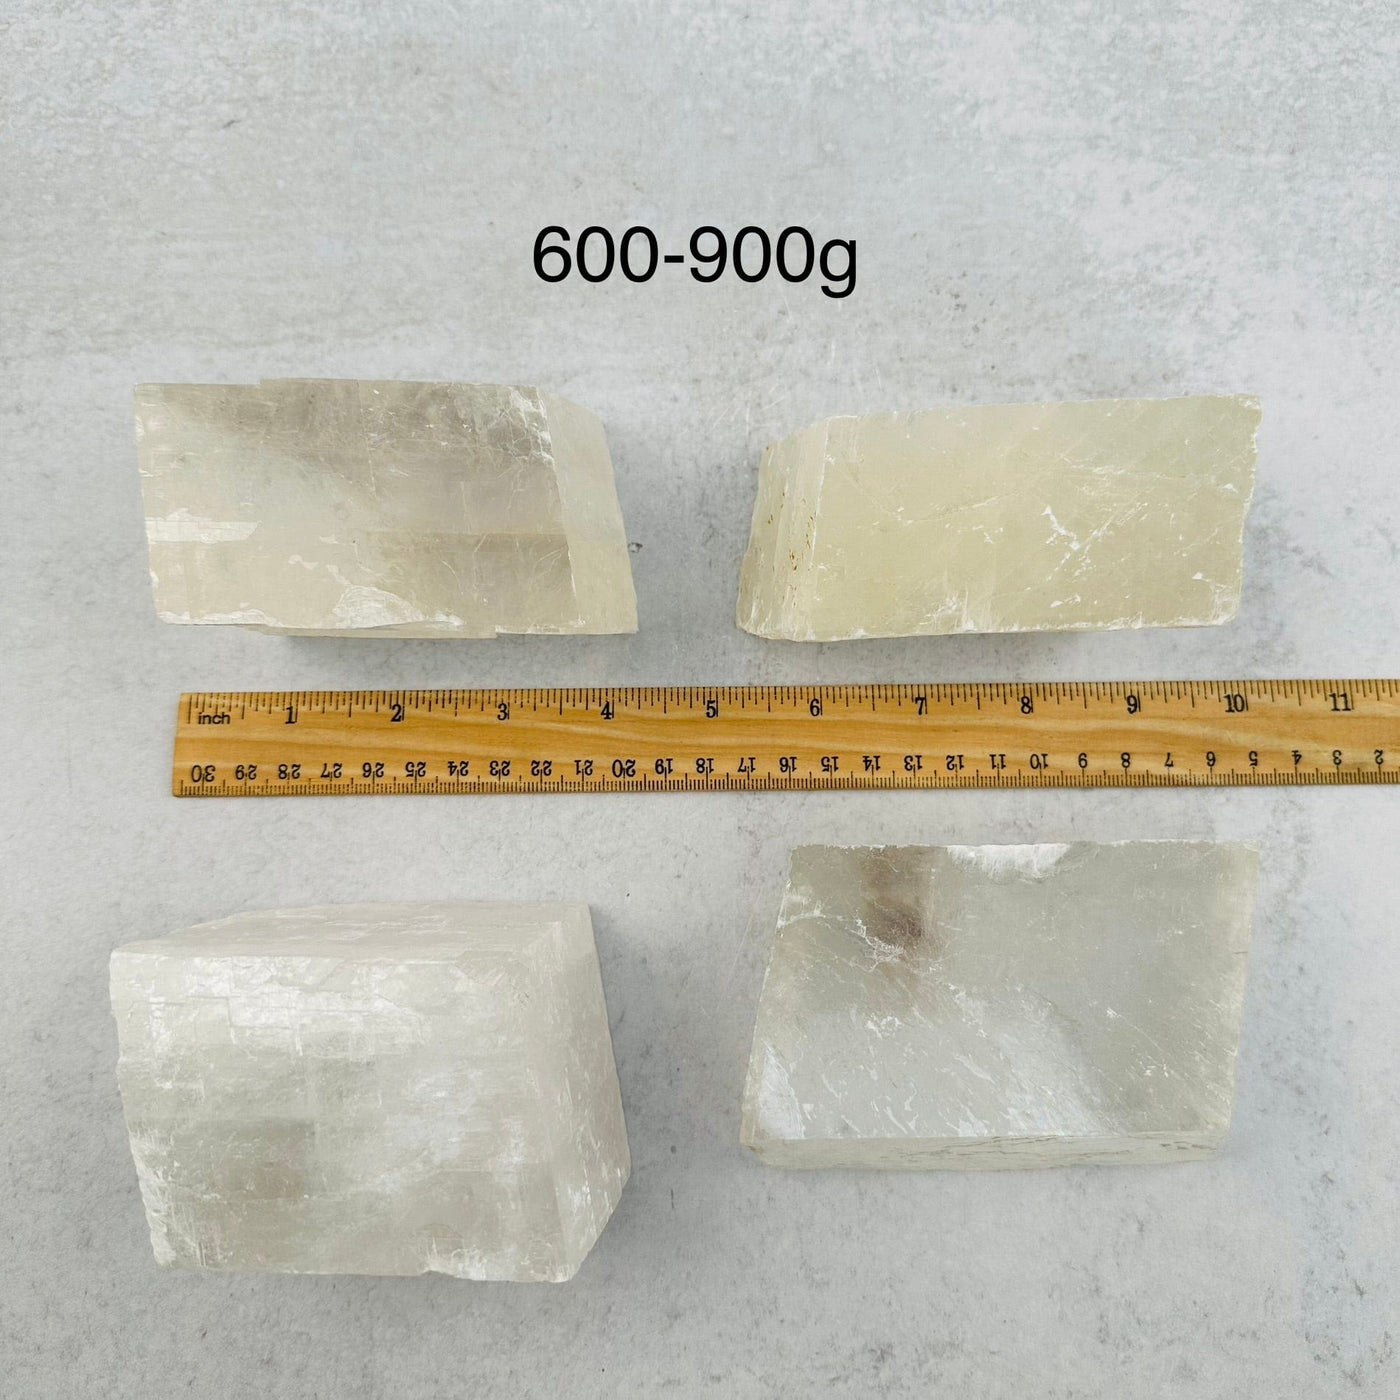 Optical Calcite - White - You Choose Size - next to a ruler for size reference